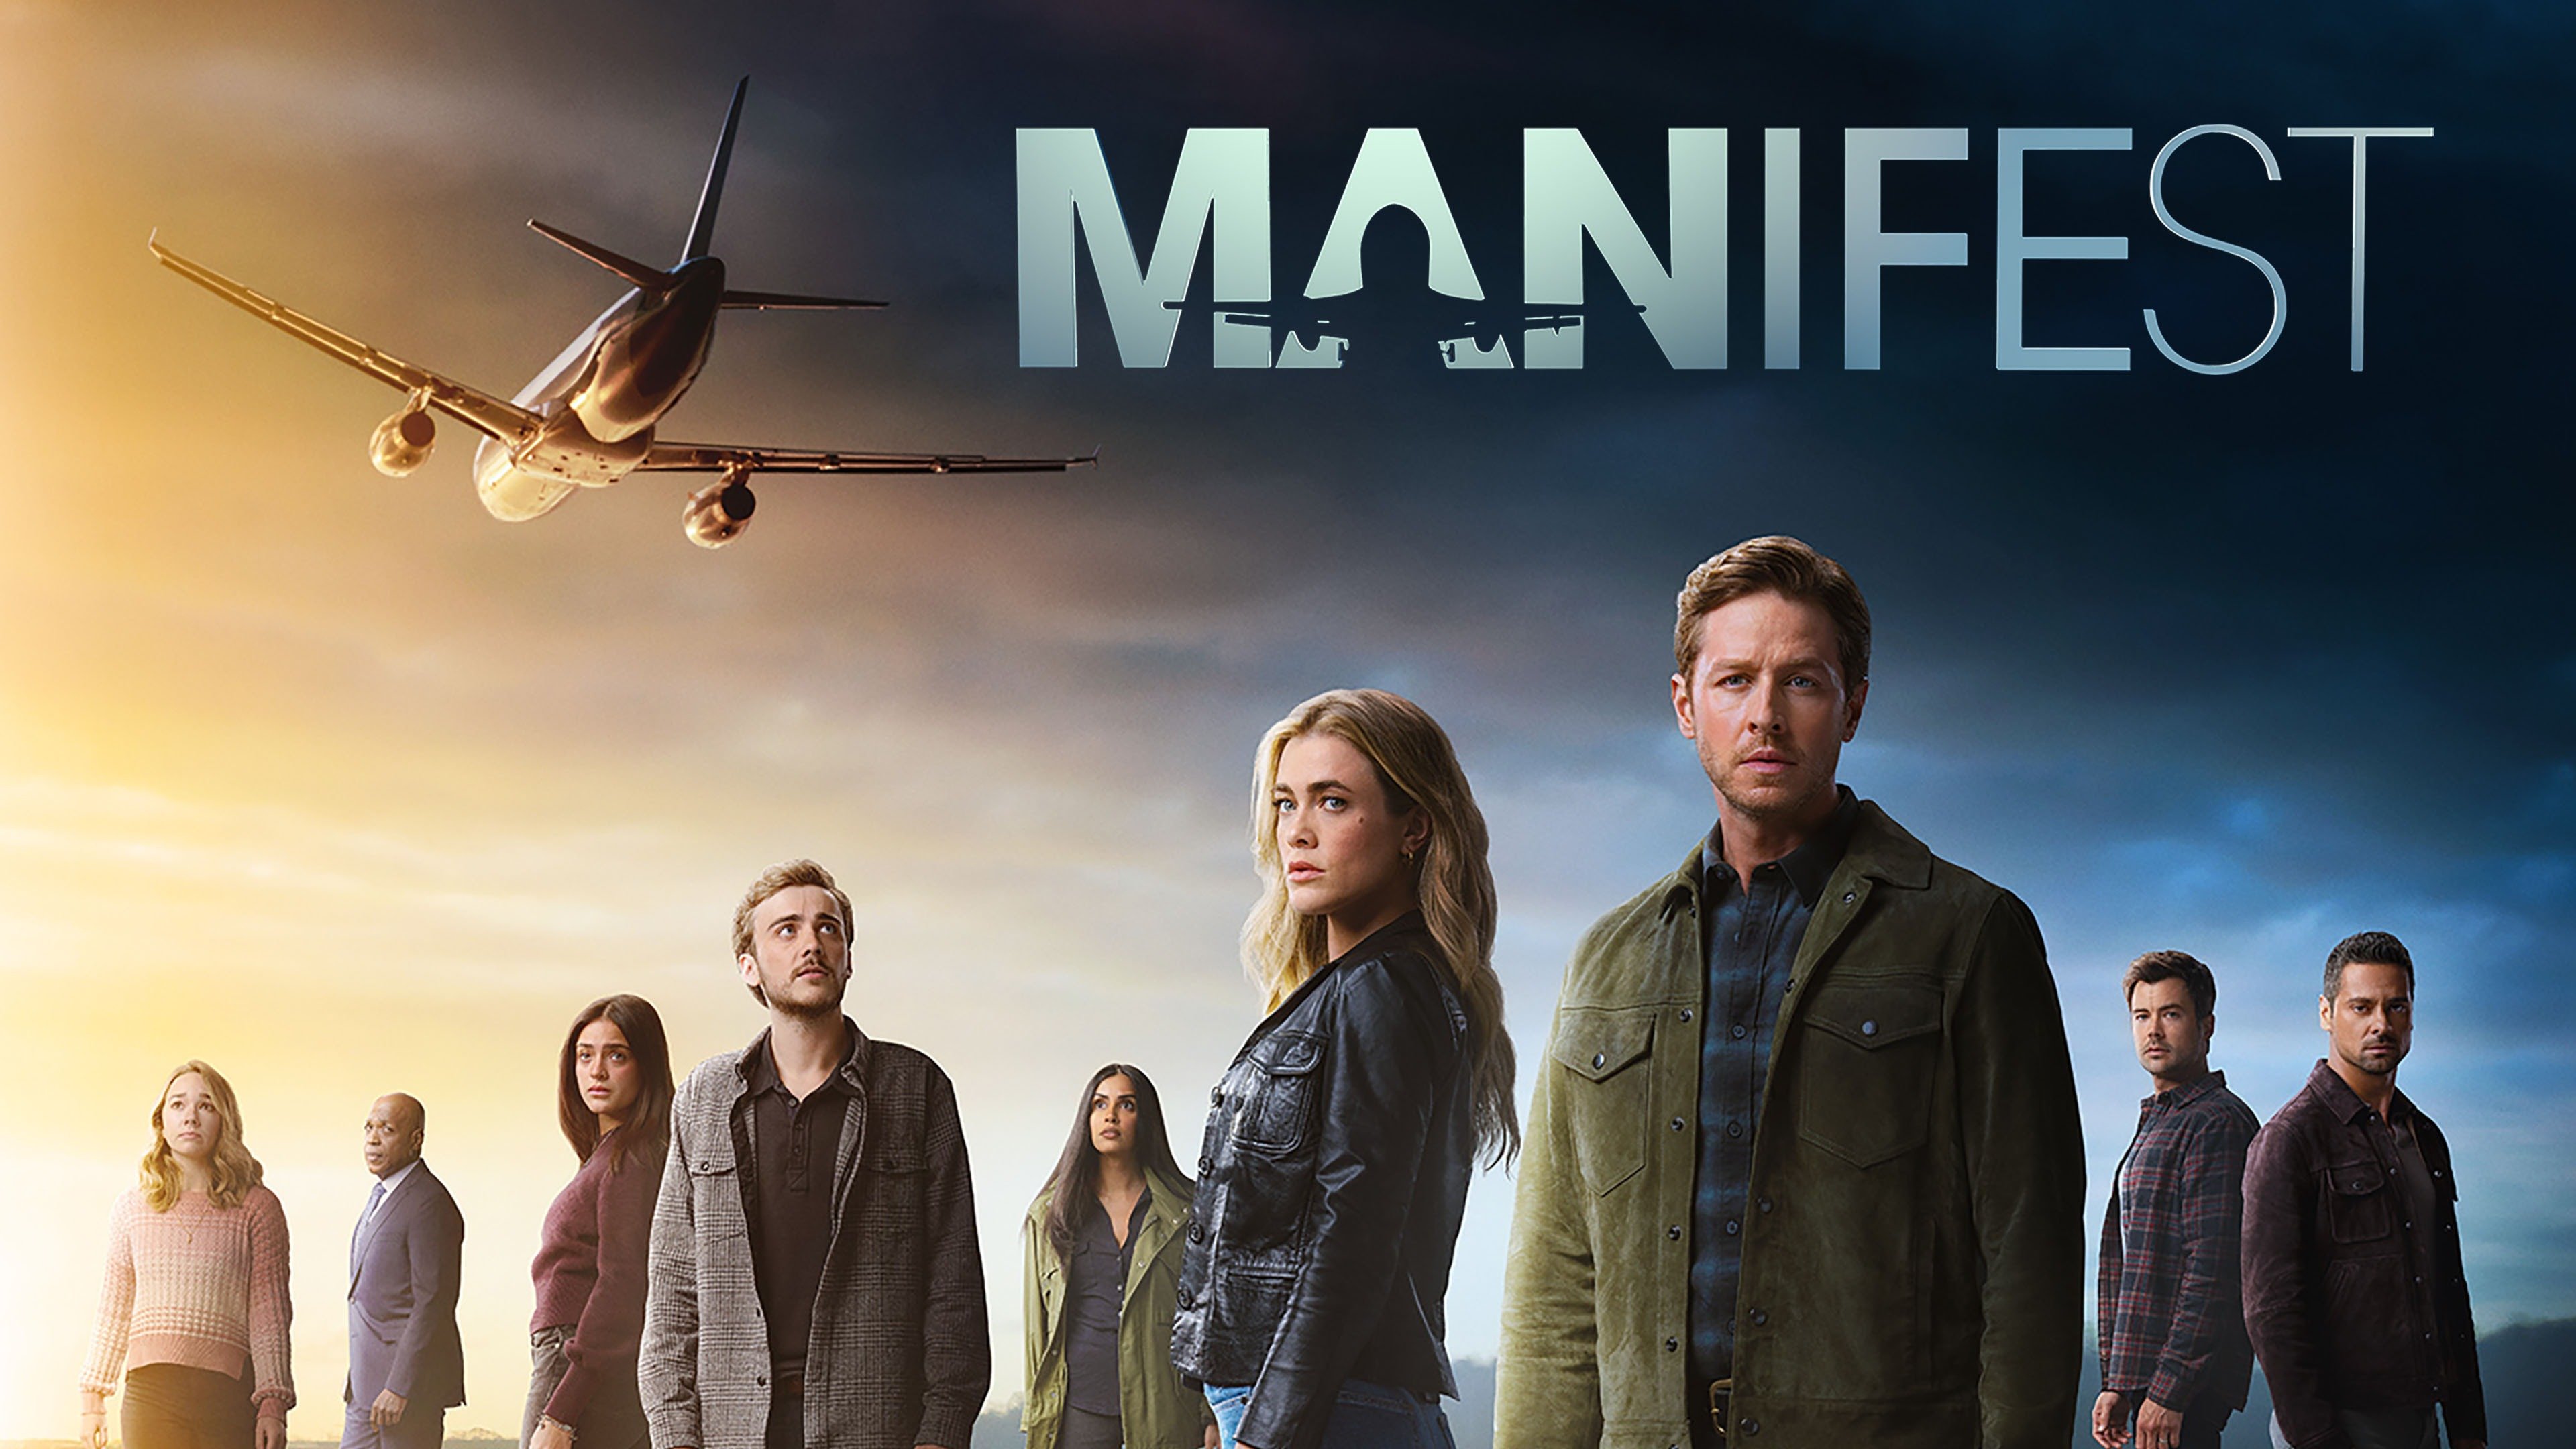 TV REVIEW: Manifest Series (Seasons 1-3) - Worth The Watch? - YouTube